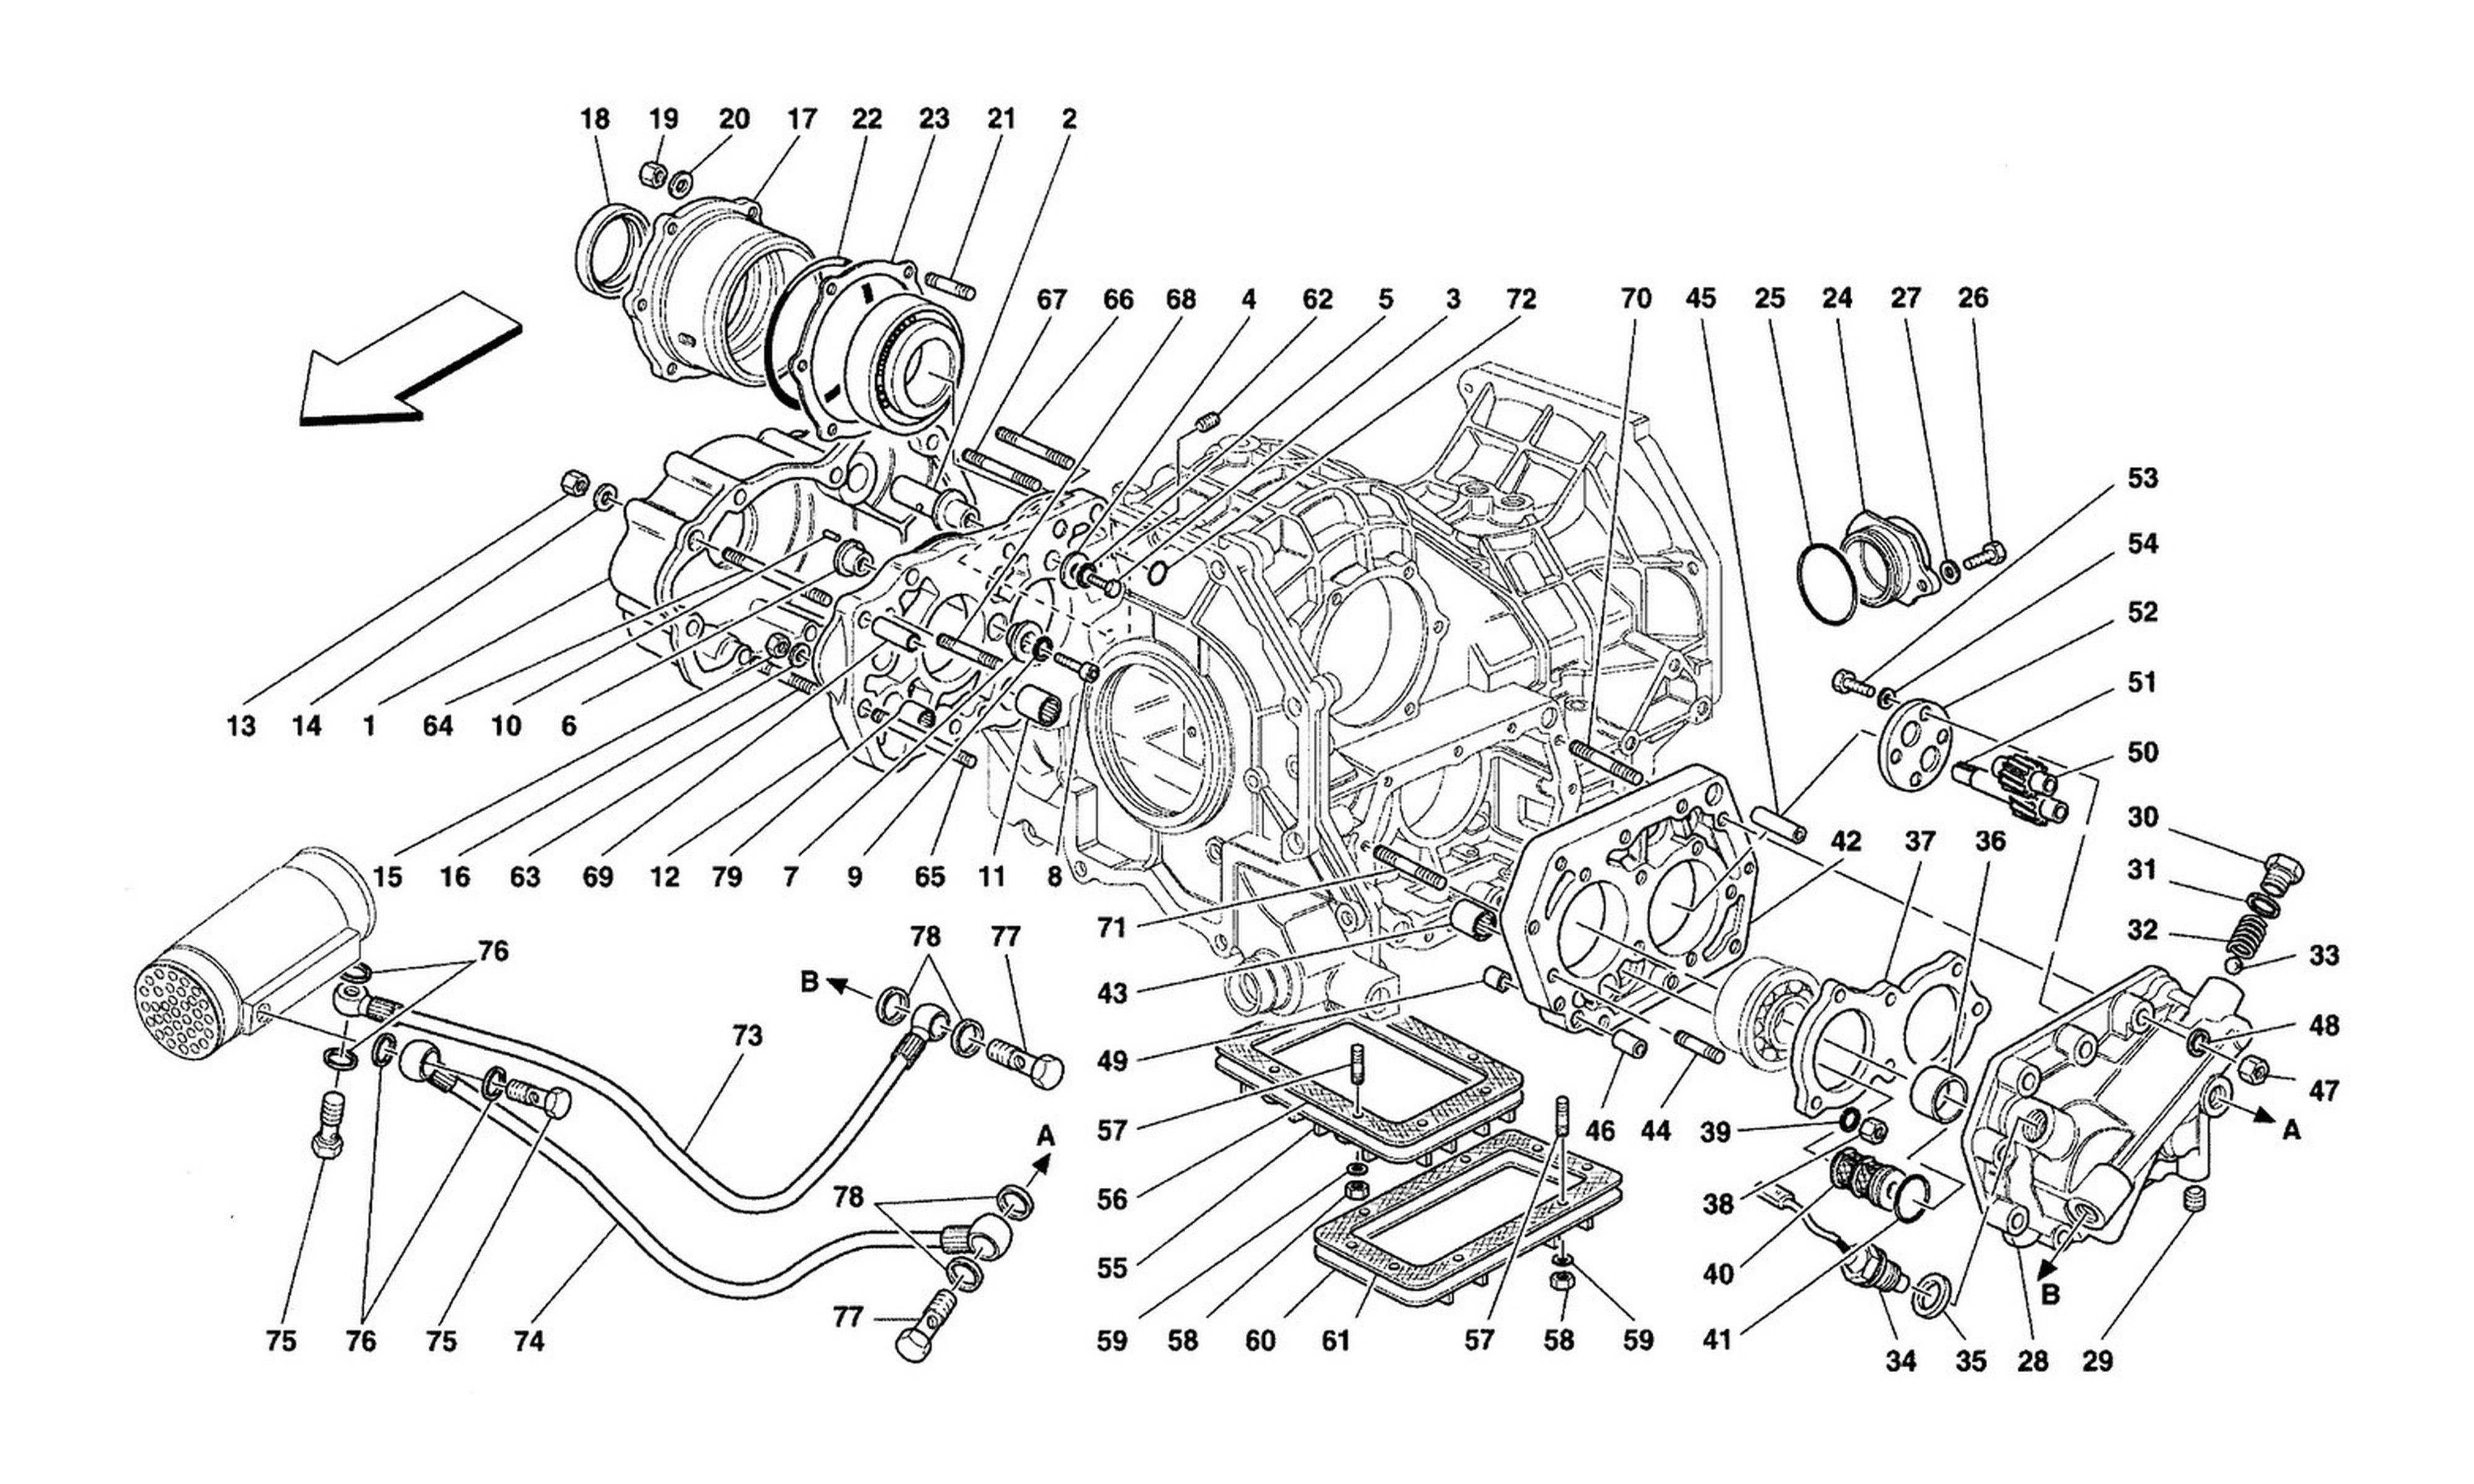 Schematic: Gearbox Covers And Lubrication